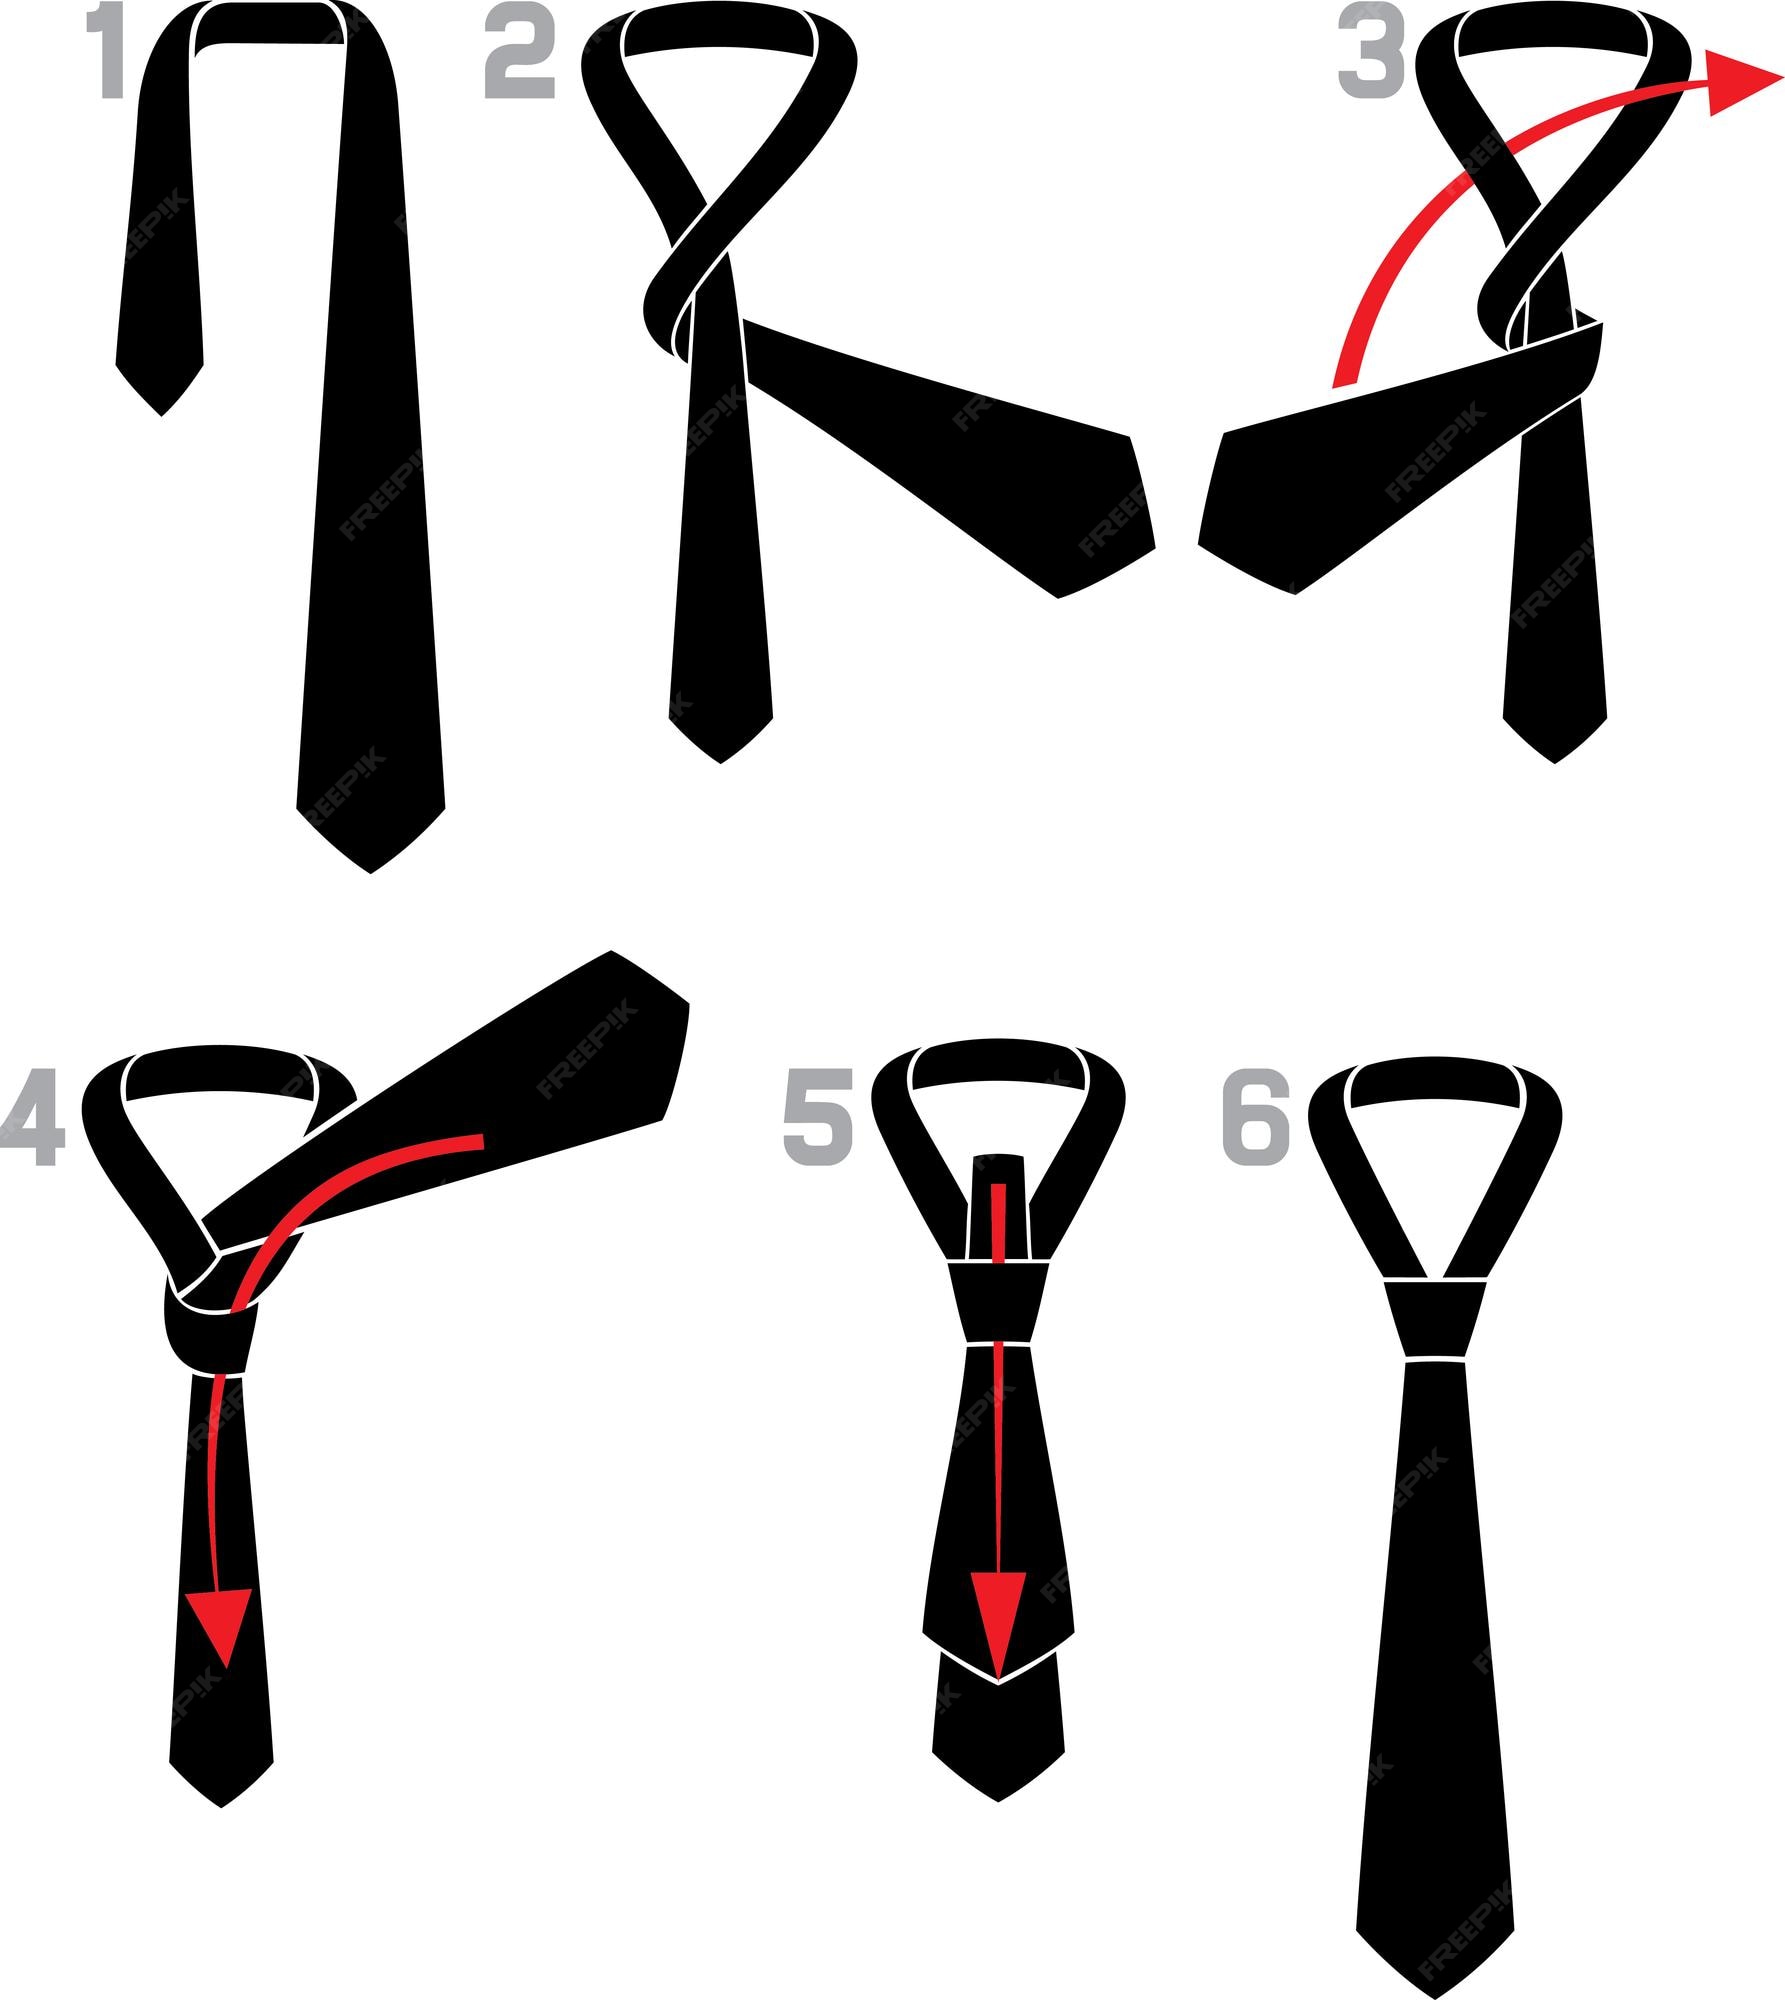 Premium Vector | Tie and knot instructions